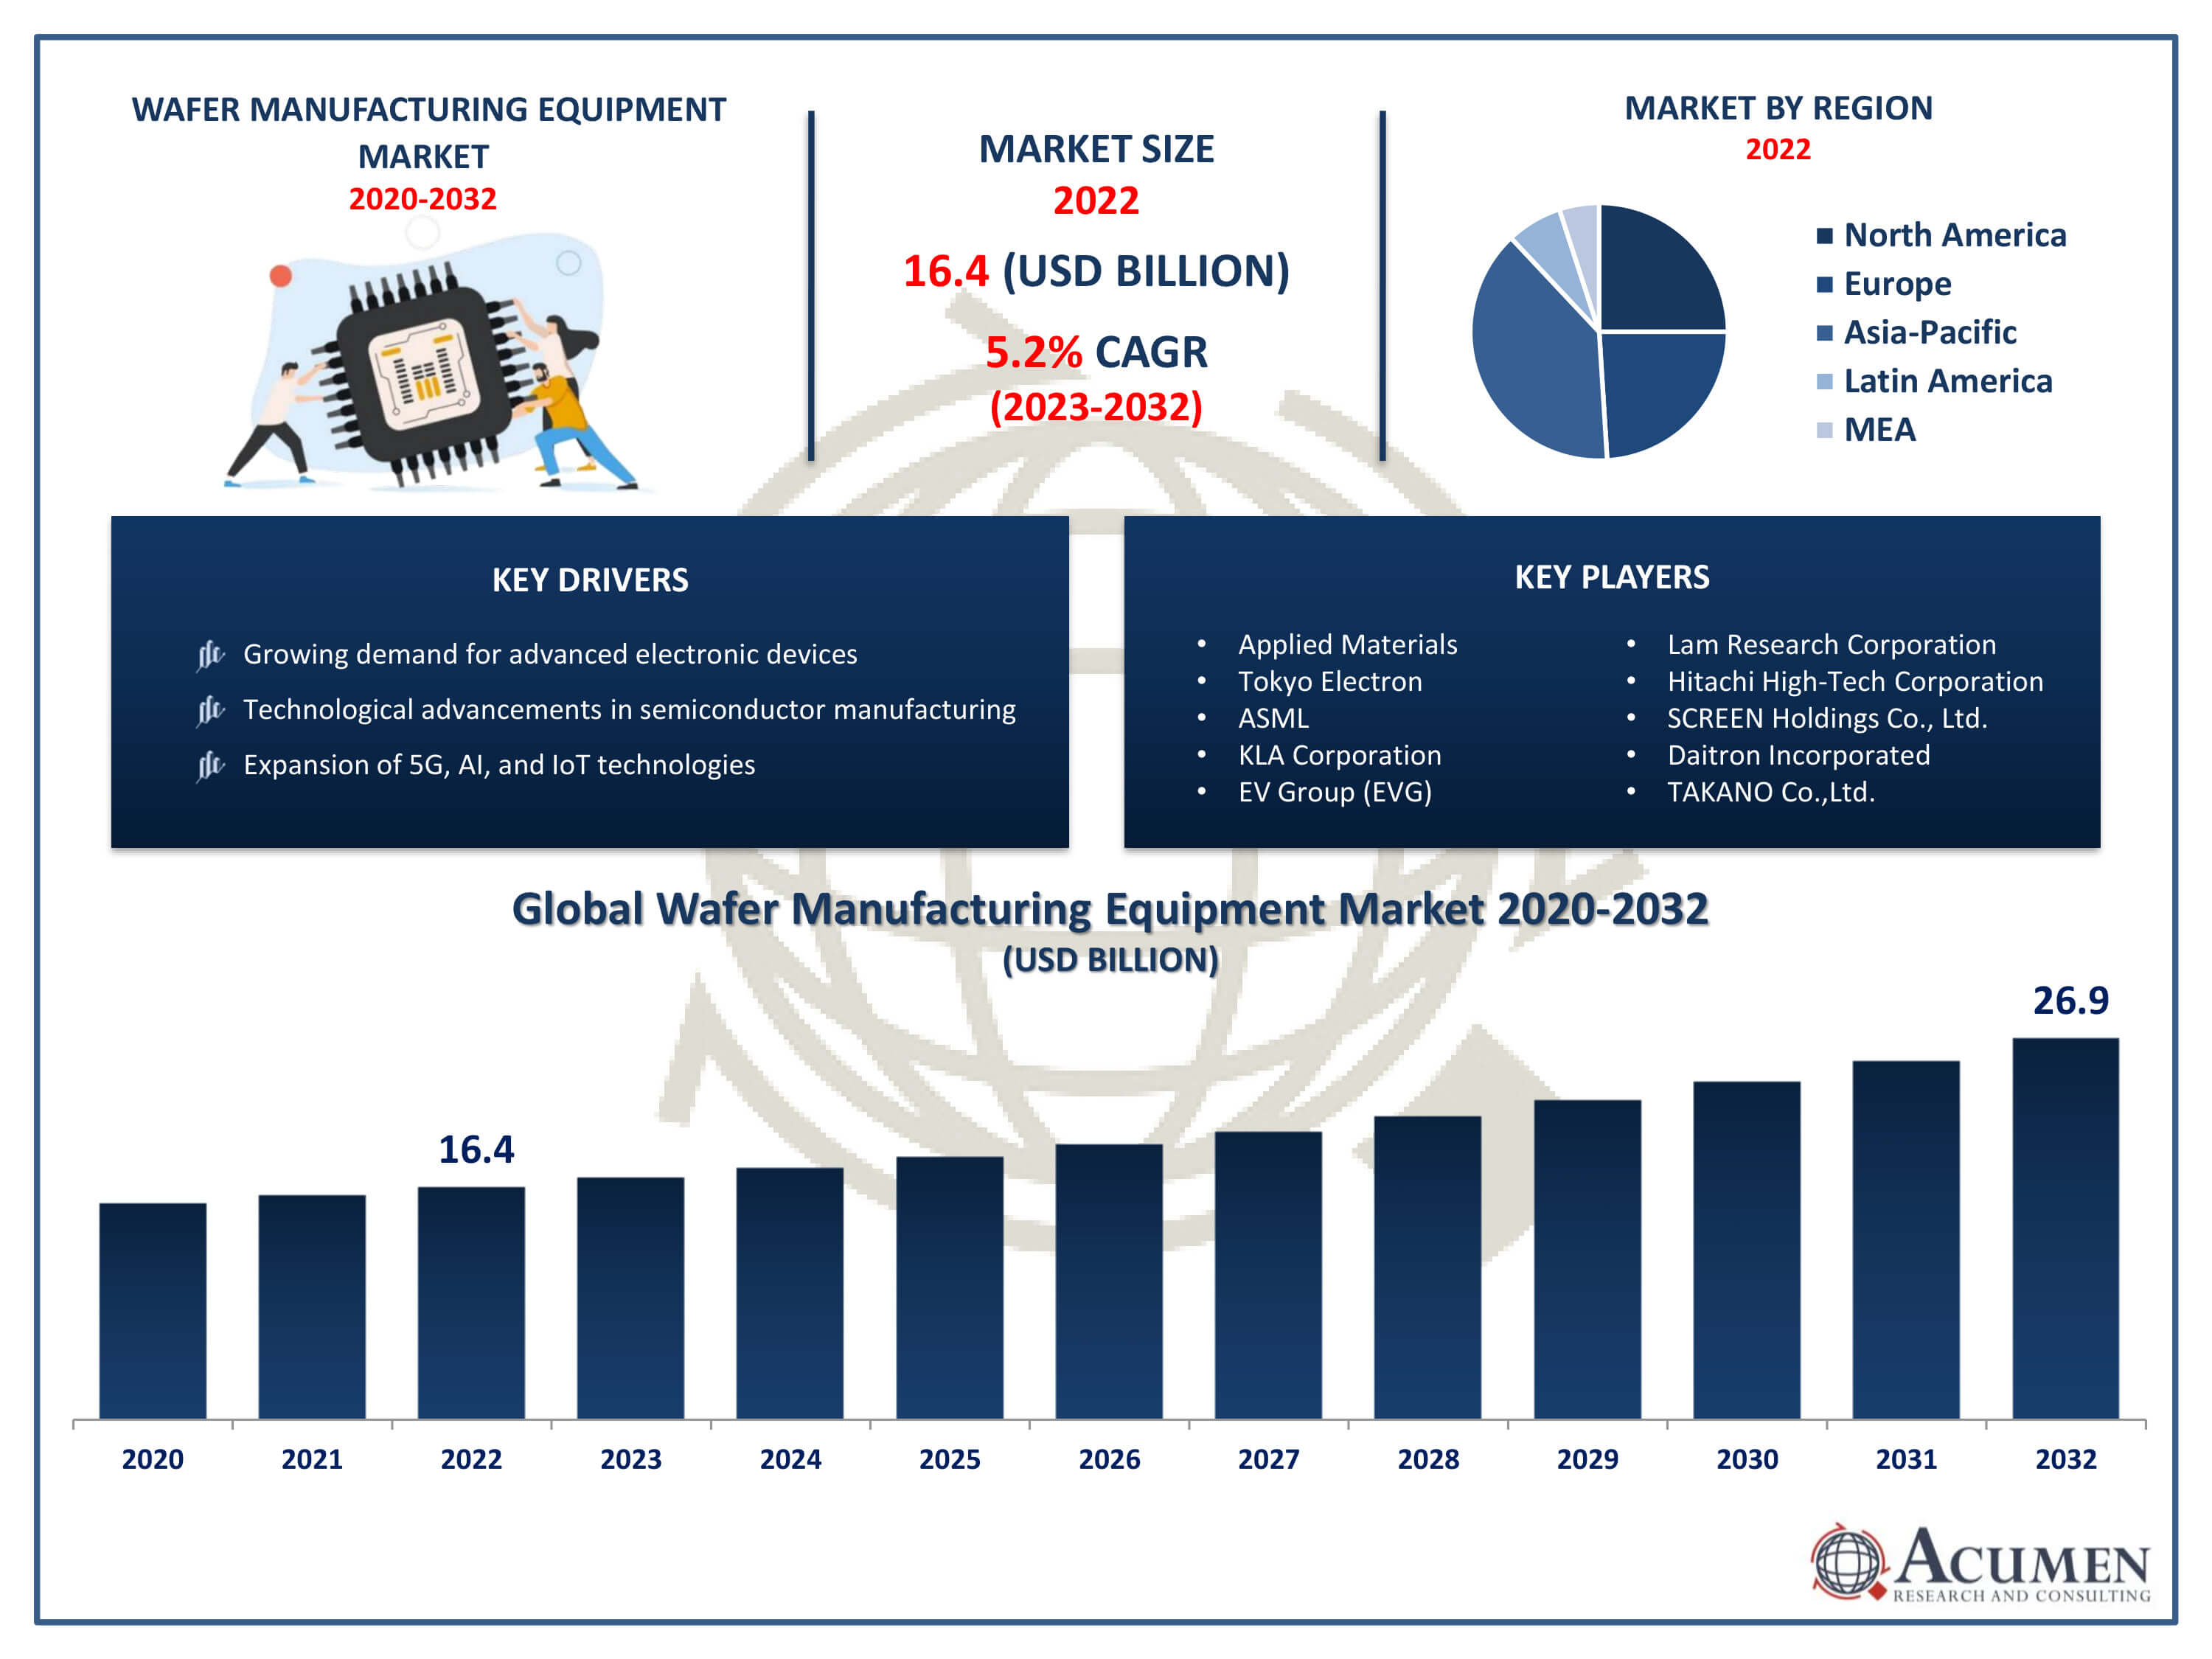 Wafer Manufacturing Equipment Market Trends